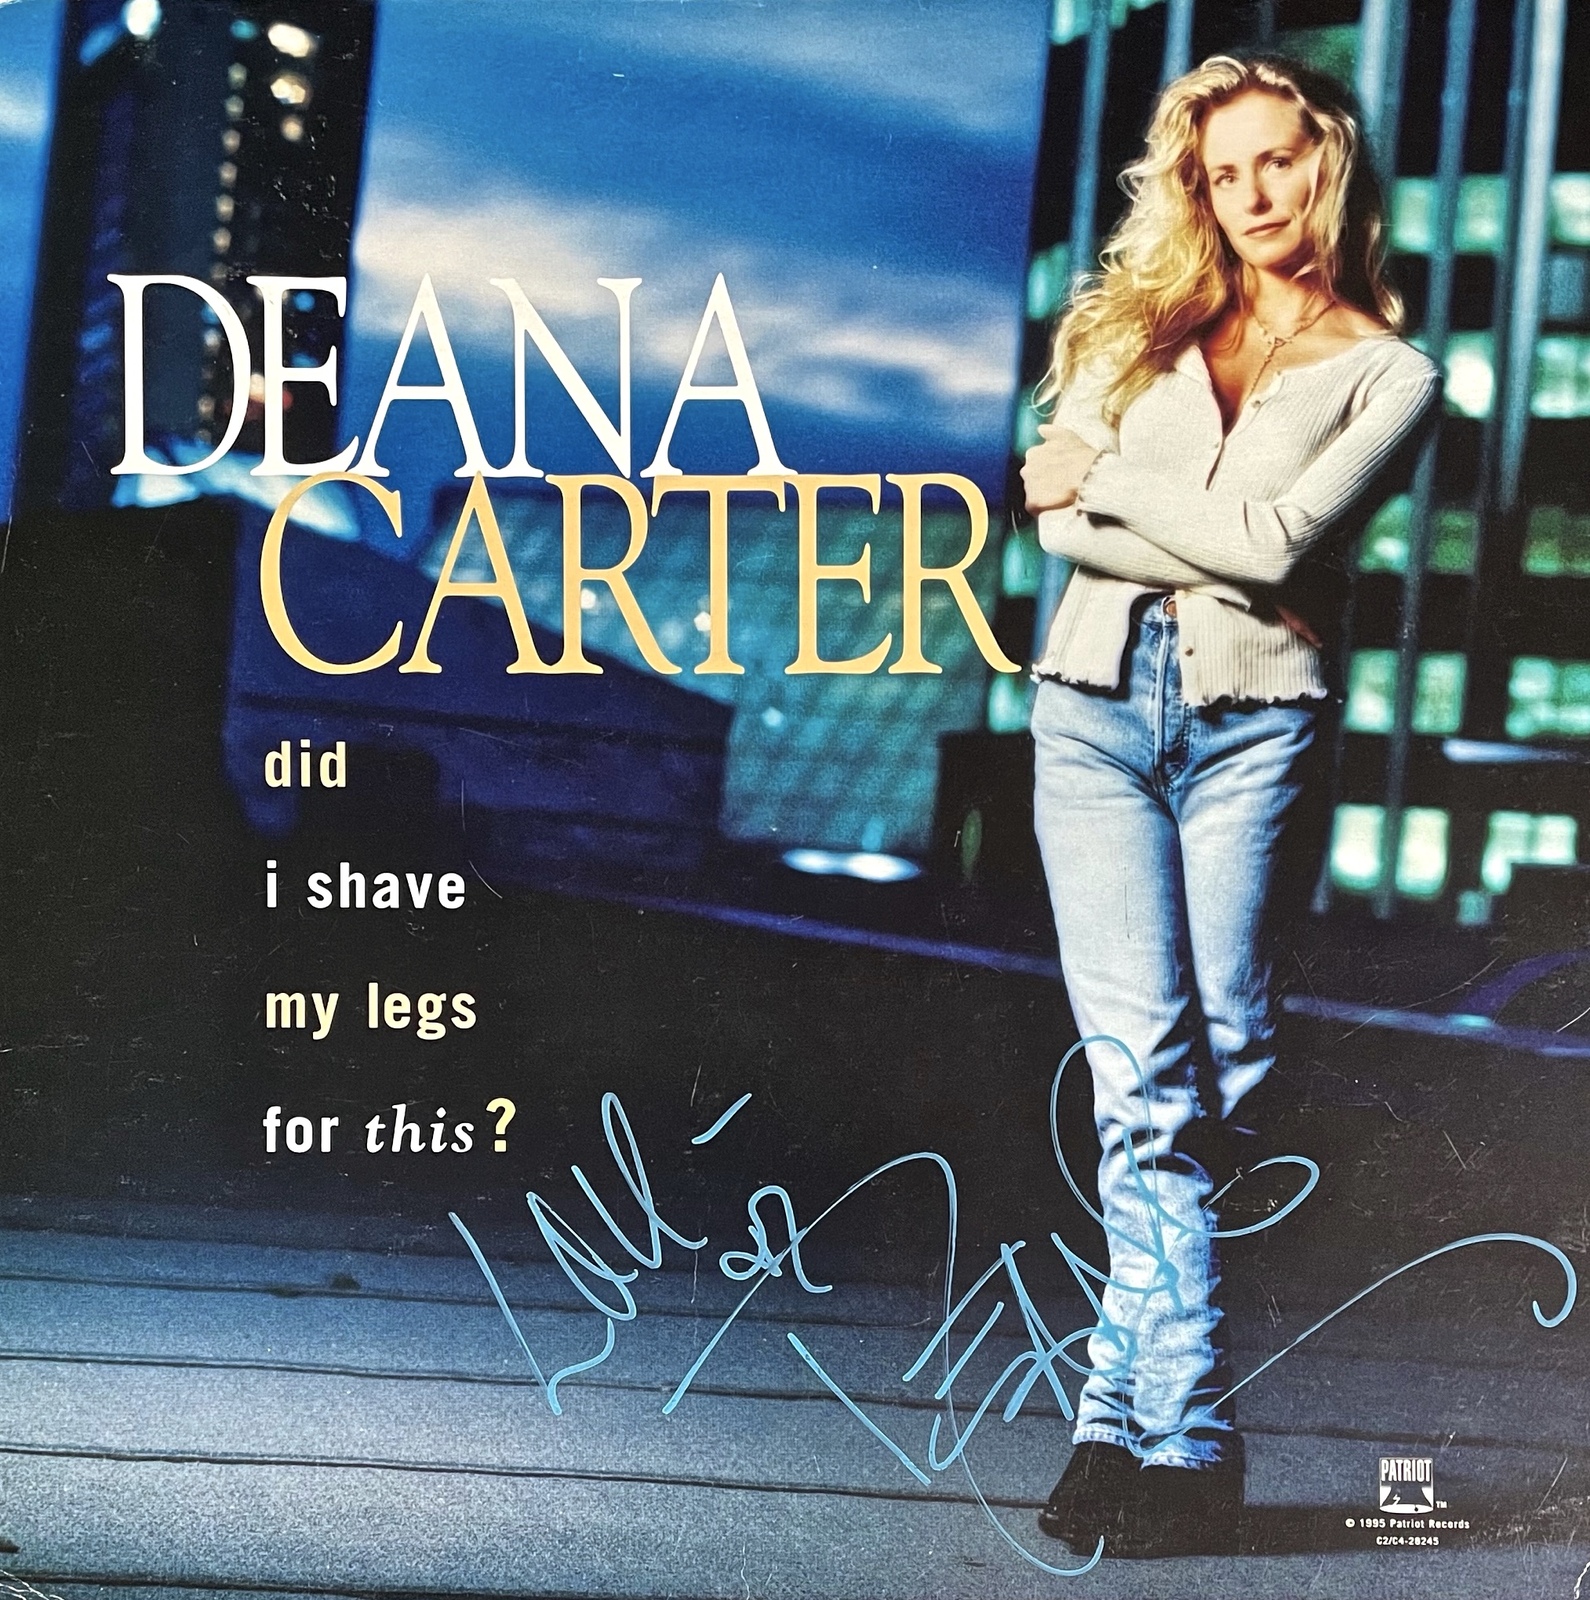 DEANA CARTER Autograph Record ALBUM SLEEVE DID I SHAVE MY LEGS FOR THIS JSA CERT - $49.99